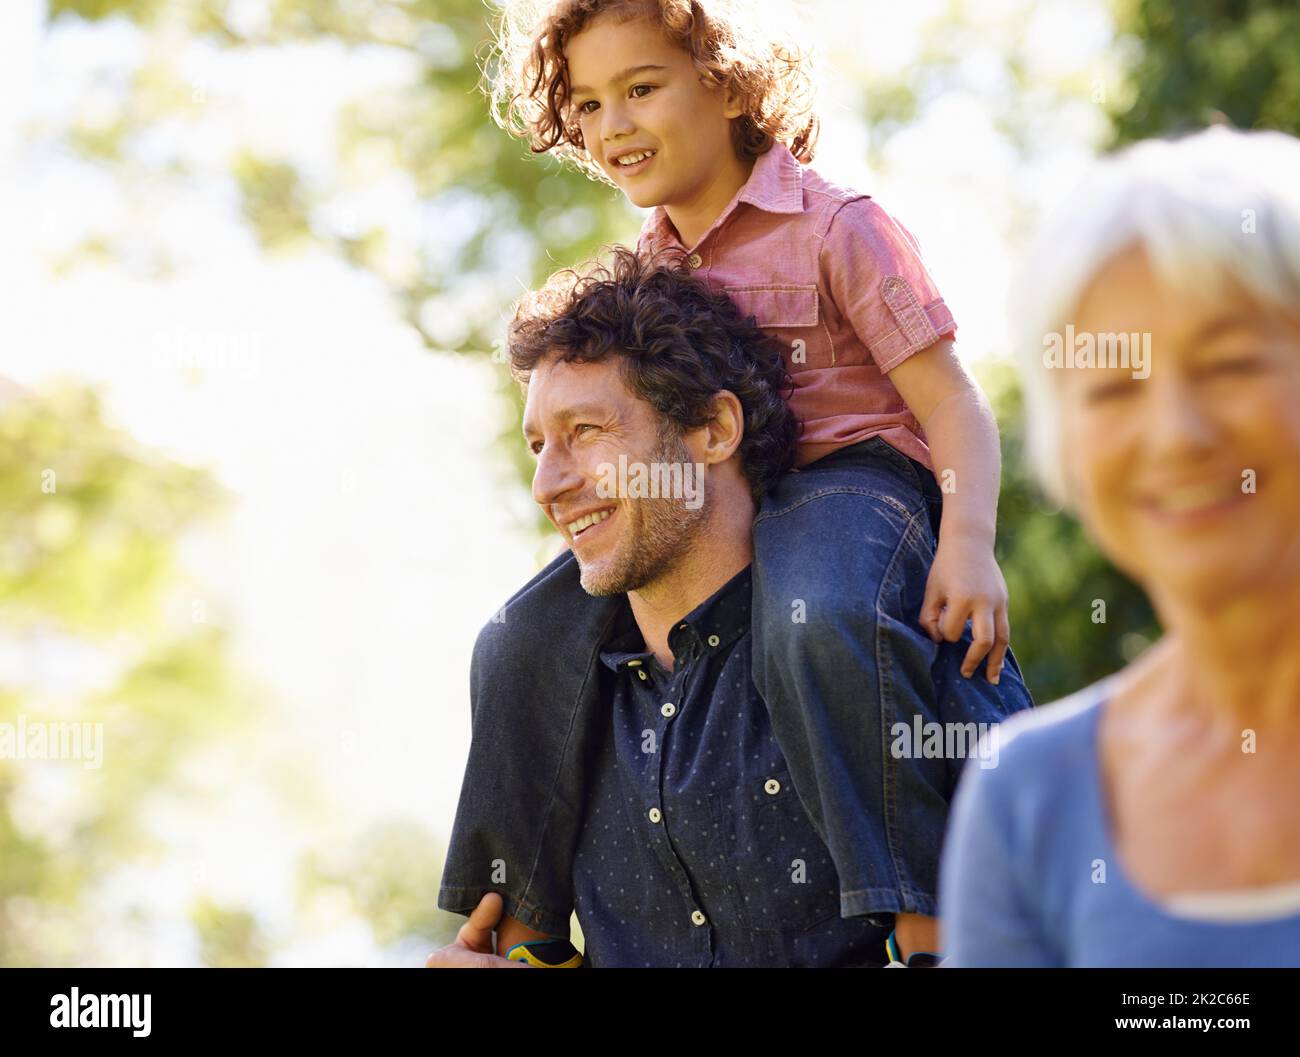 Spending the day with his little buddy. Shot of a young boy riding on his fathers shoulders. Stock Photo